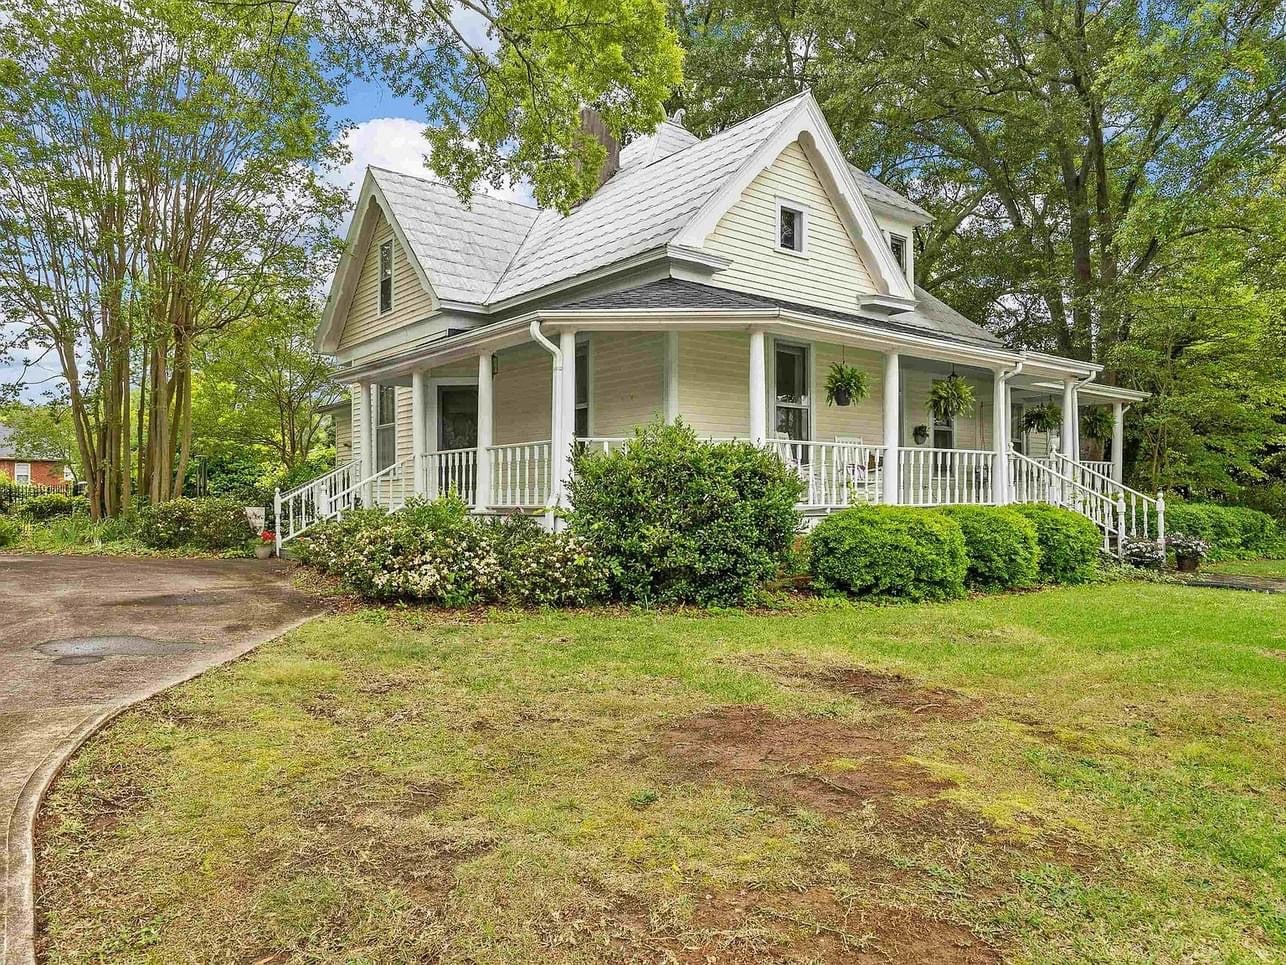 1914 Historic House For Sale In Gaffney South Carolina